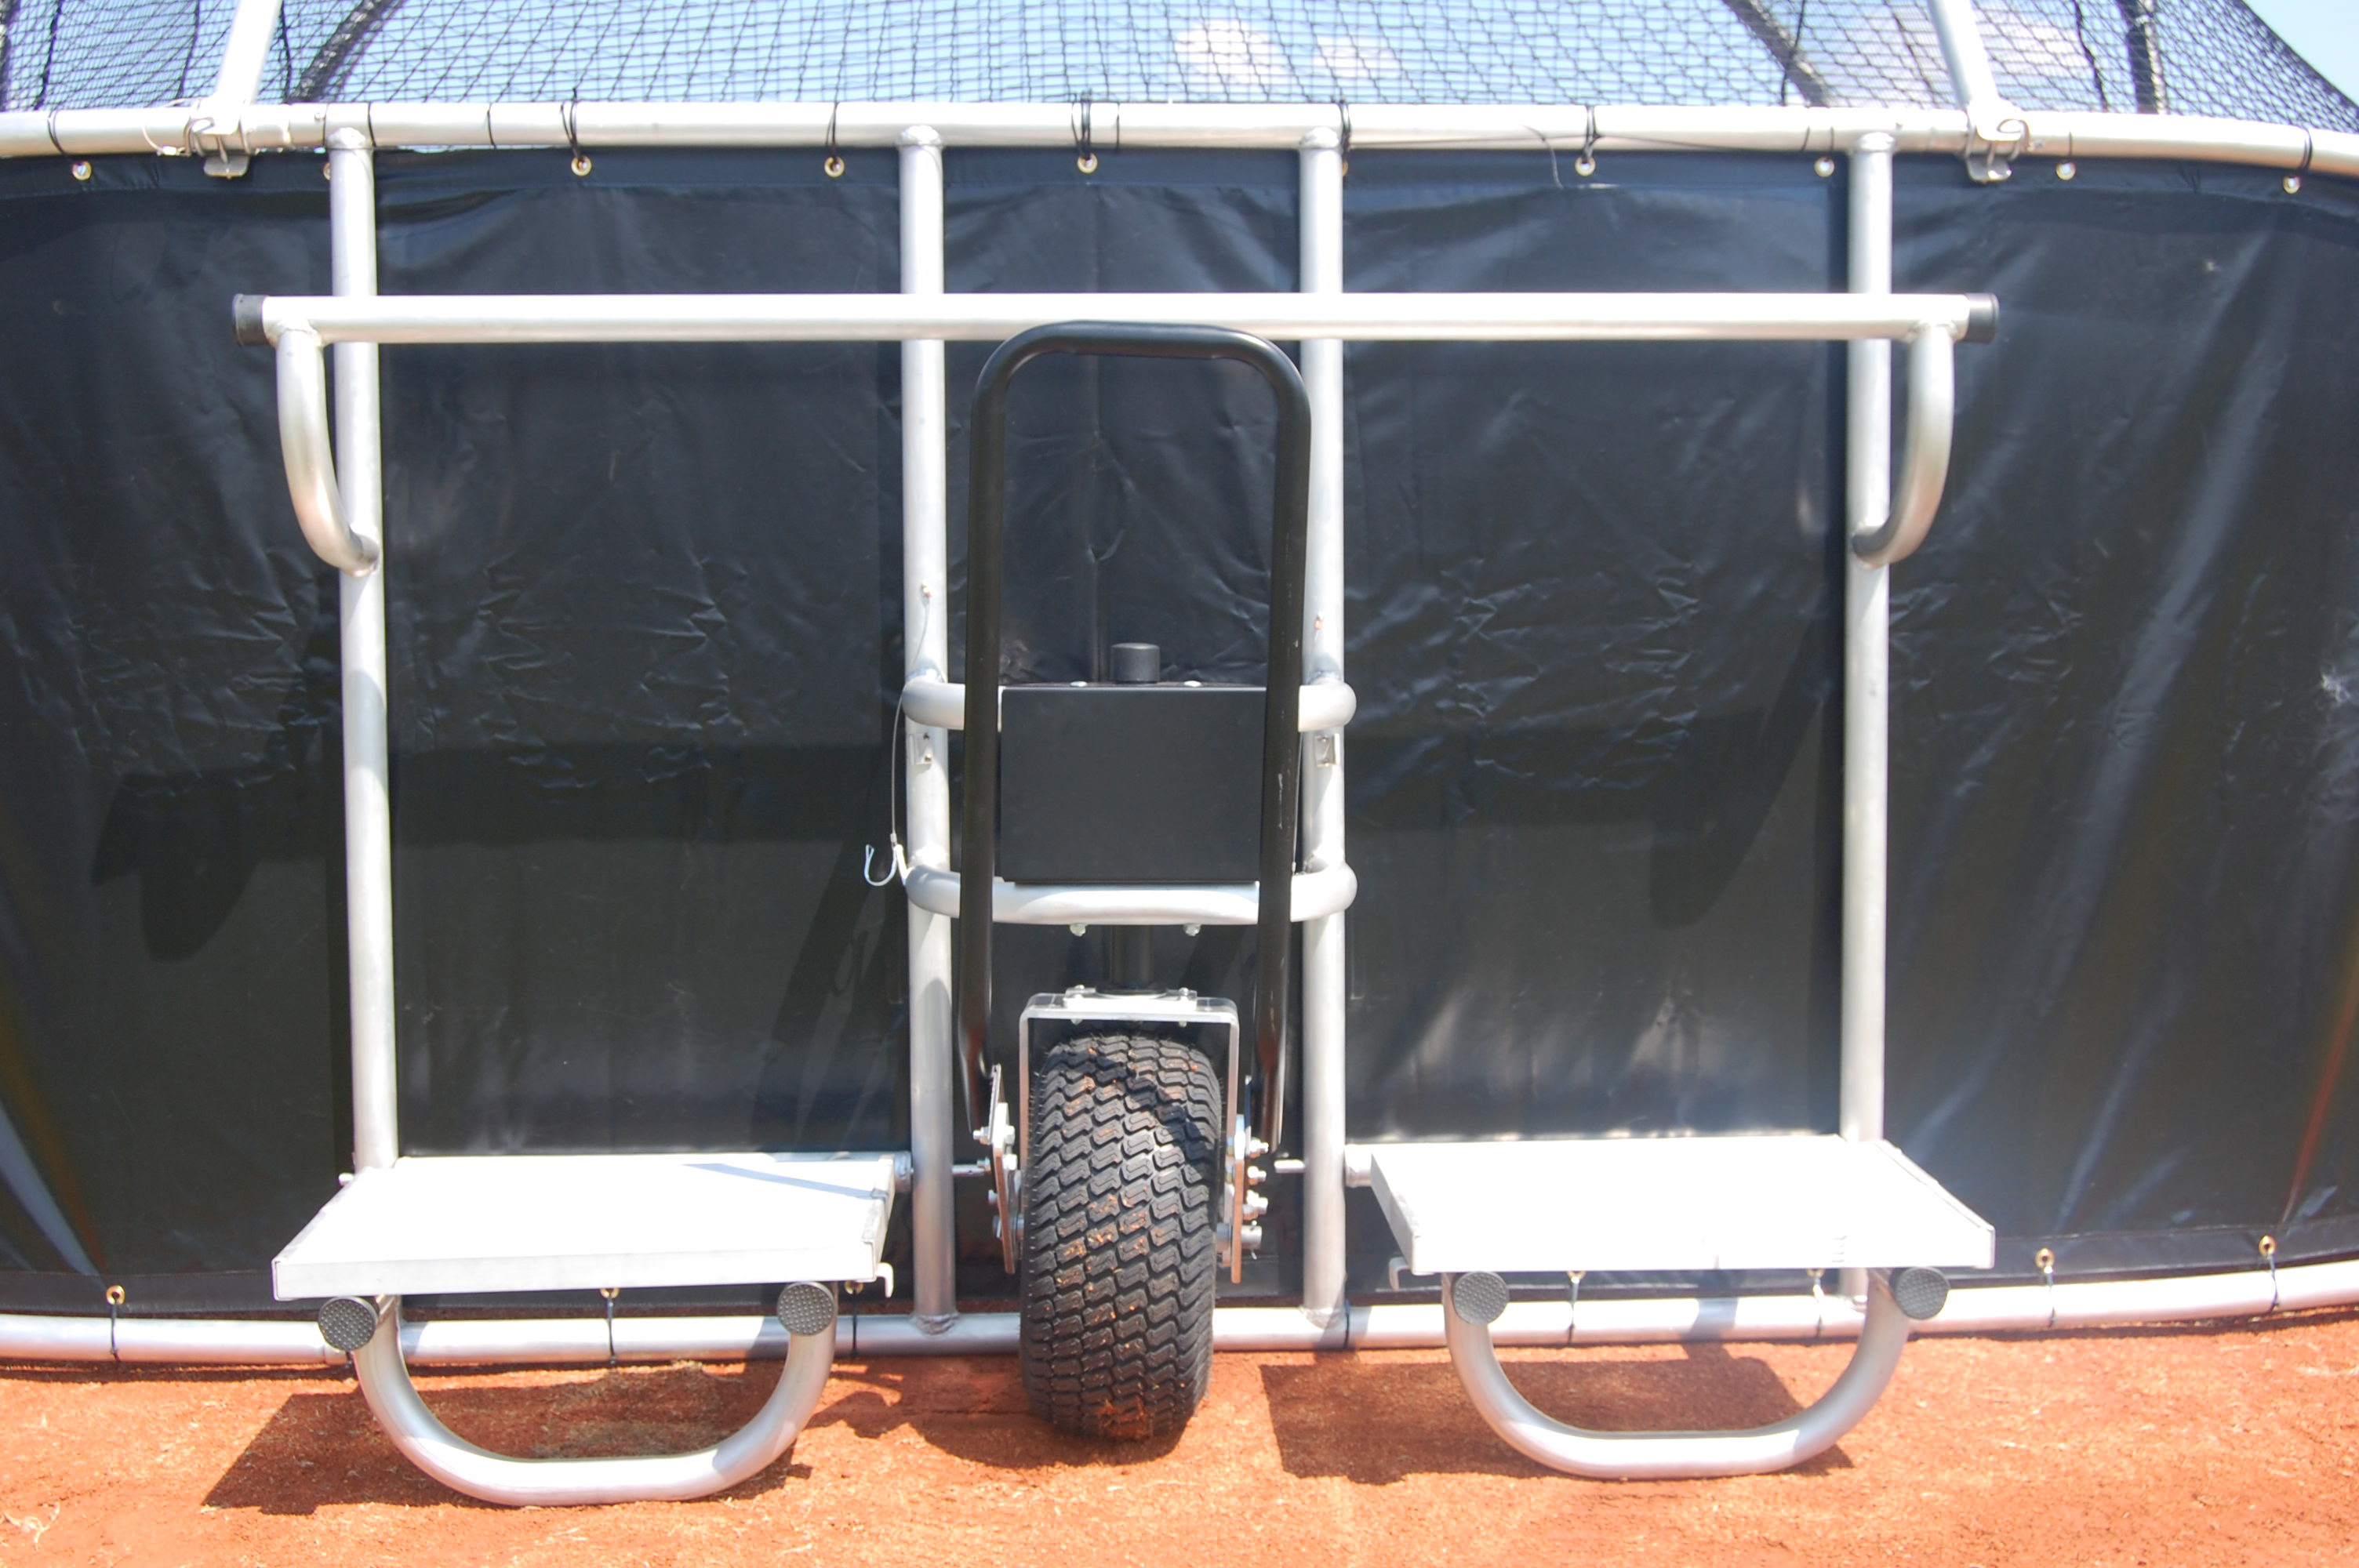 Portable Batting Cage with wheels